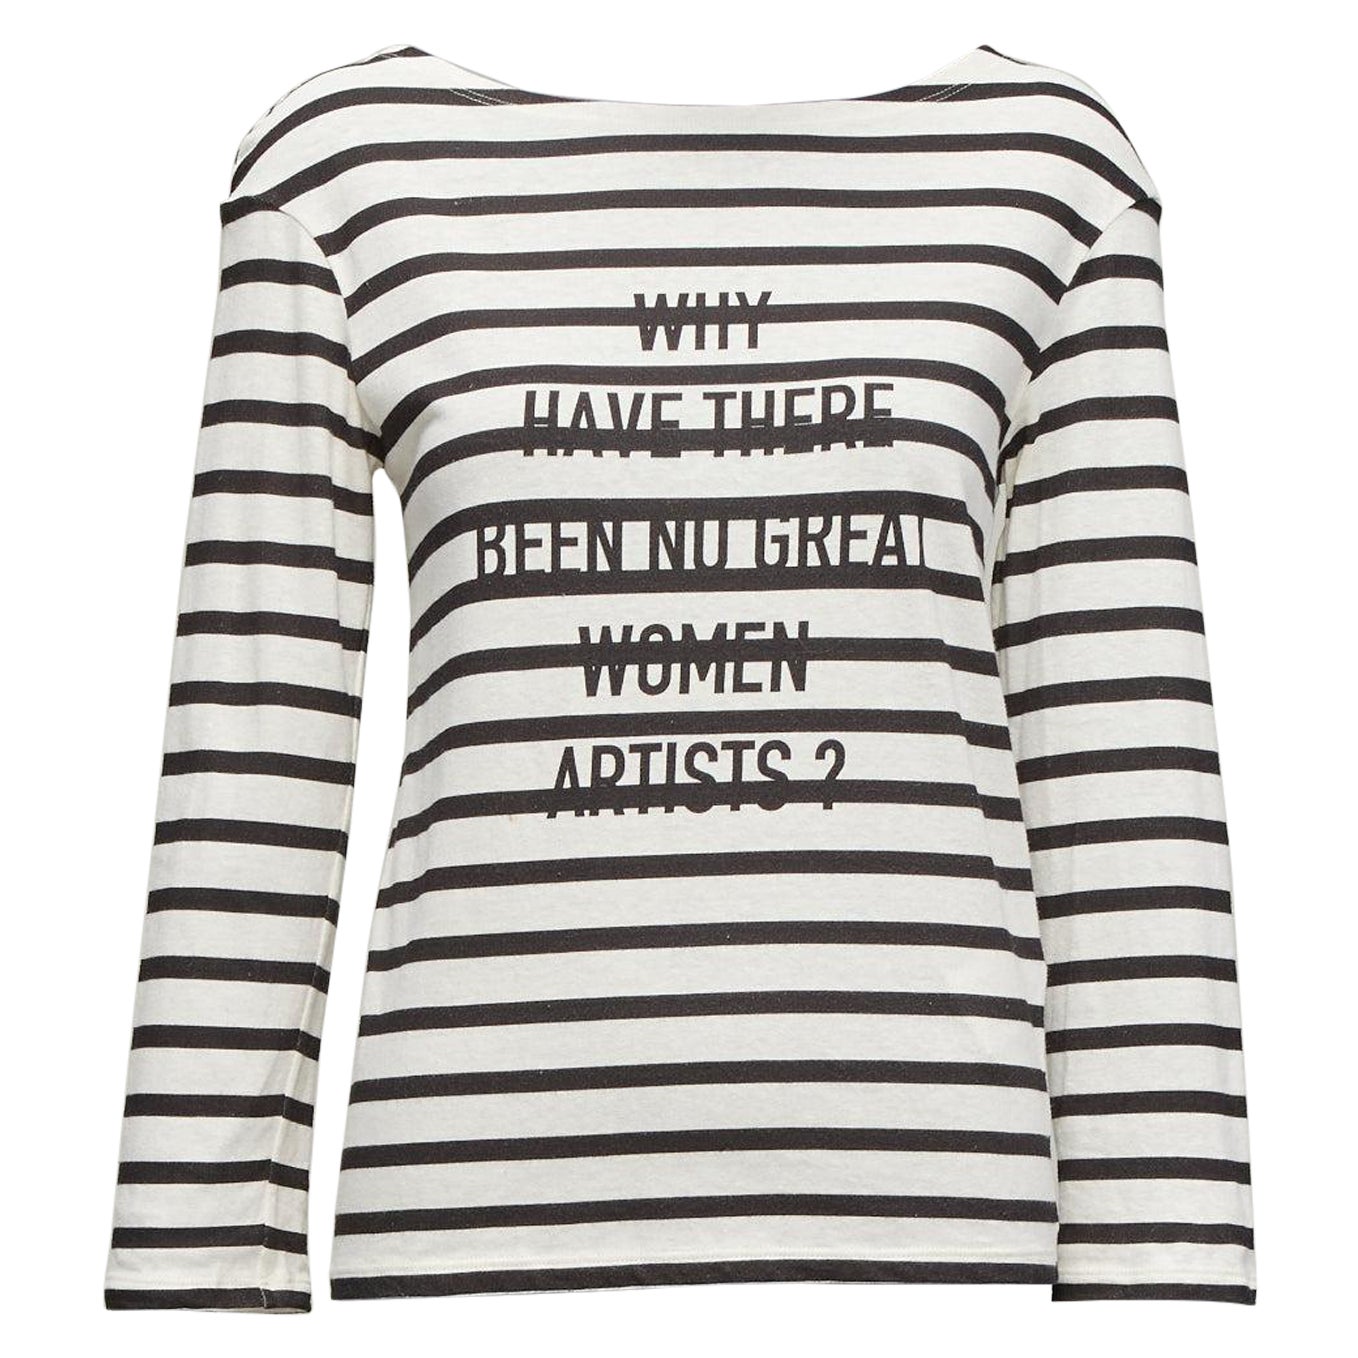 DIOR 2018 Runway No Great Women Artists striped cotton linen striped tshirt XS For Sale